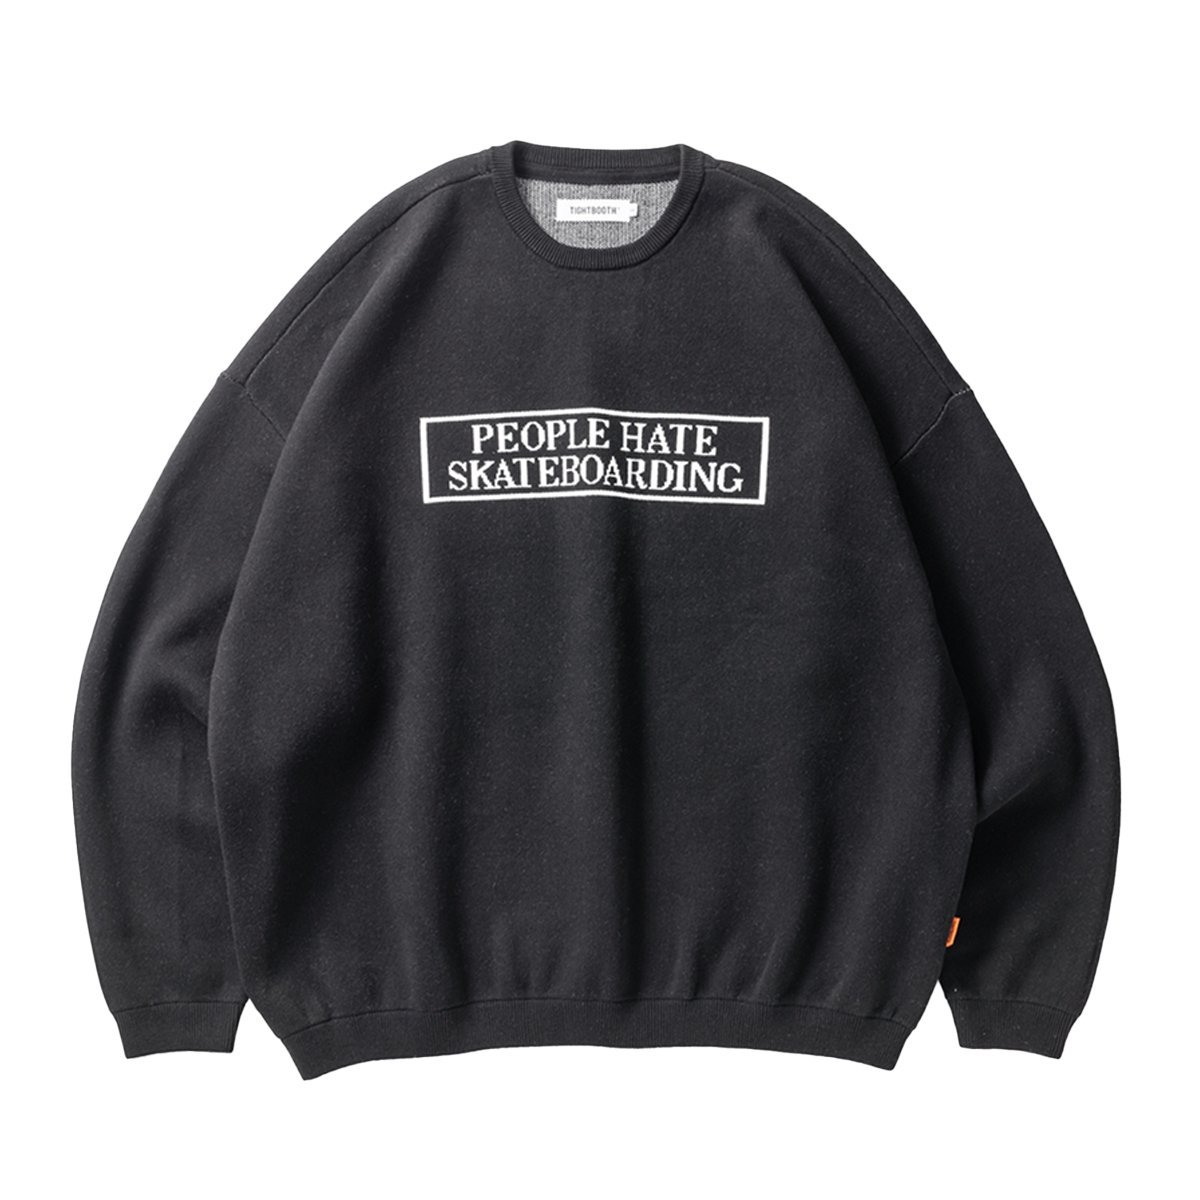 TIGHTBOOTHPeople Hate Skate Sweater (Black)
                          </a>
            <span class=